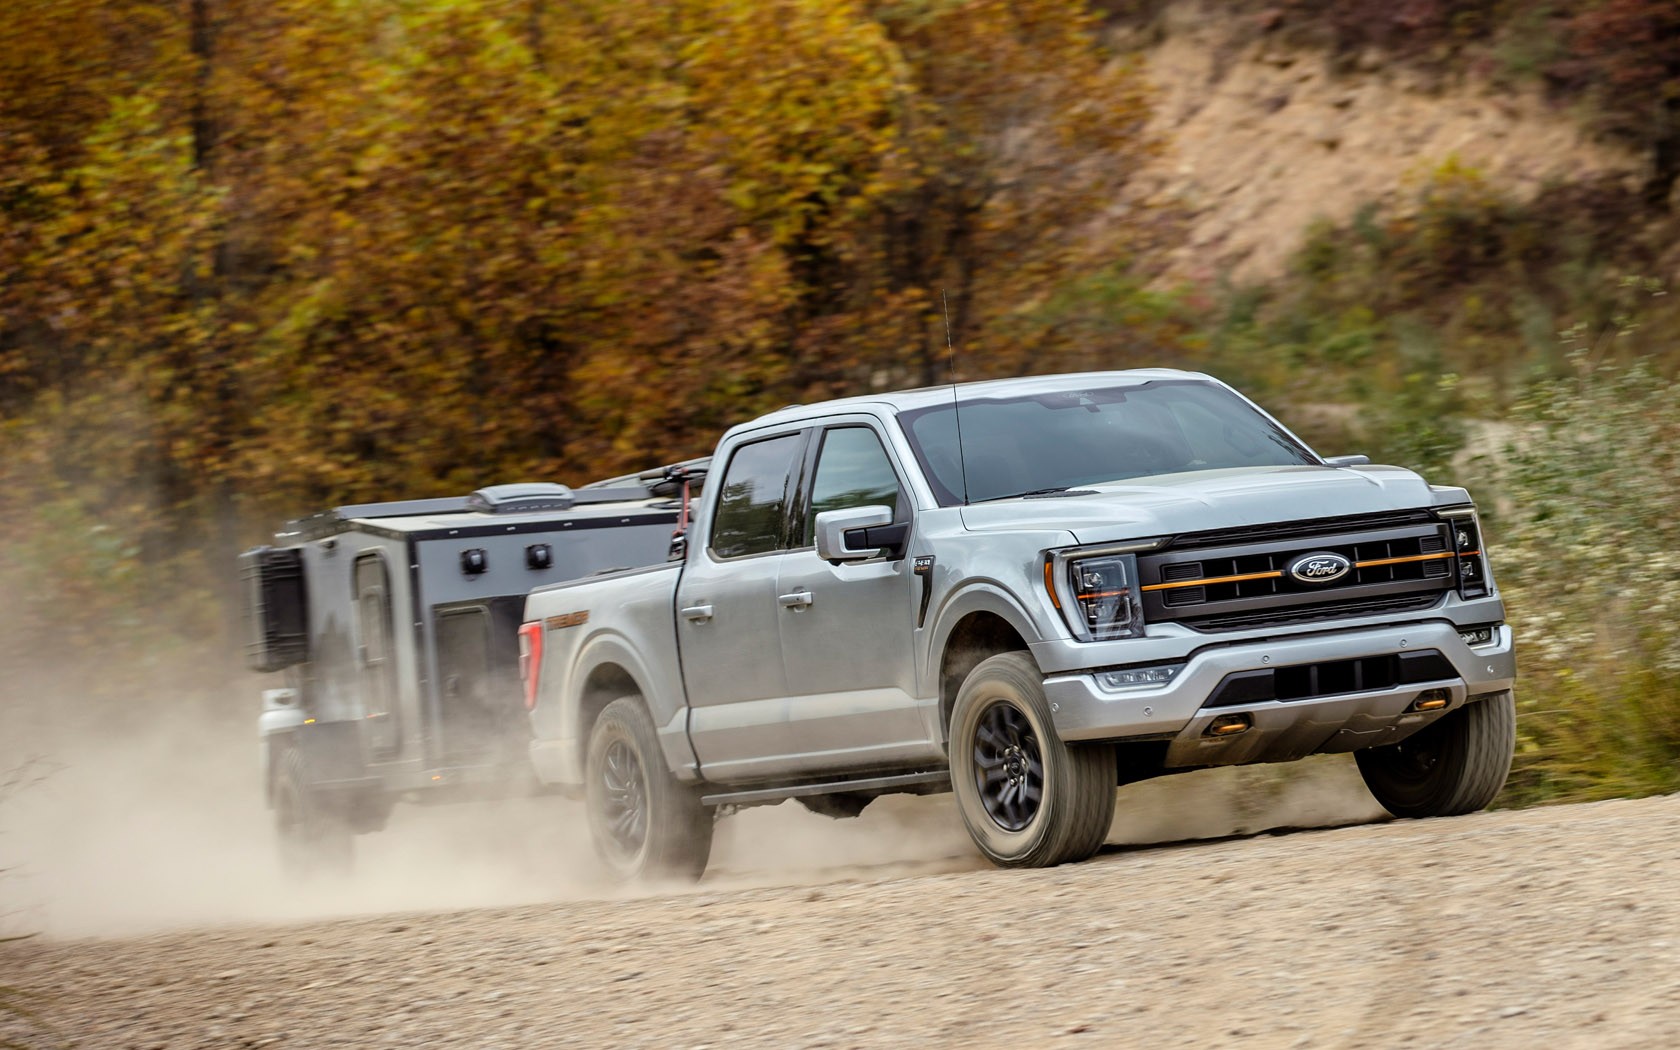 2021 Ford F150 Tremor OffRoad Capabilities and Where It Outshines